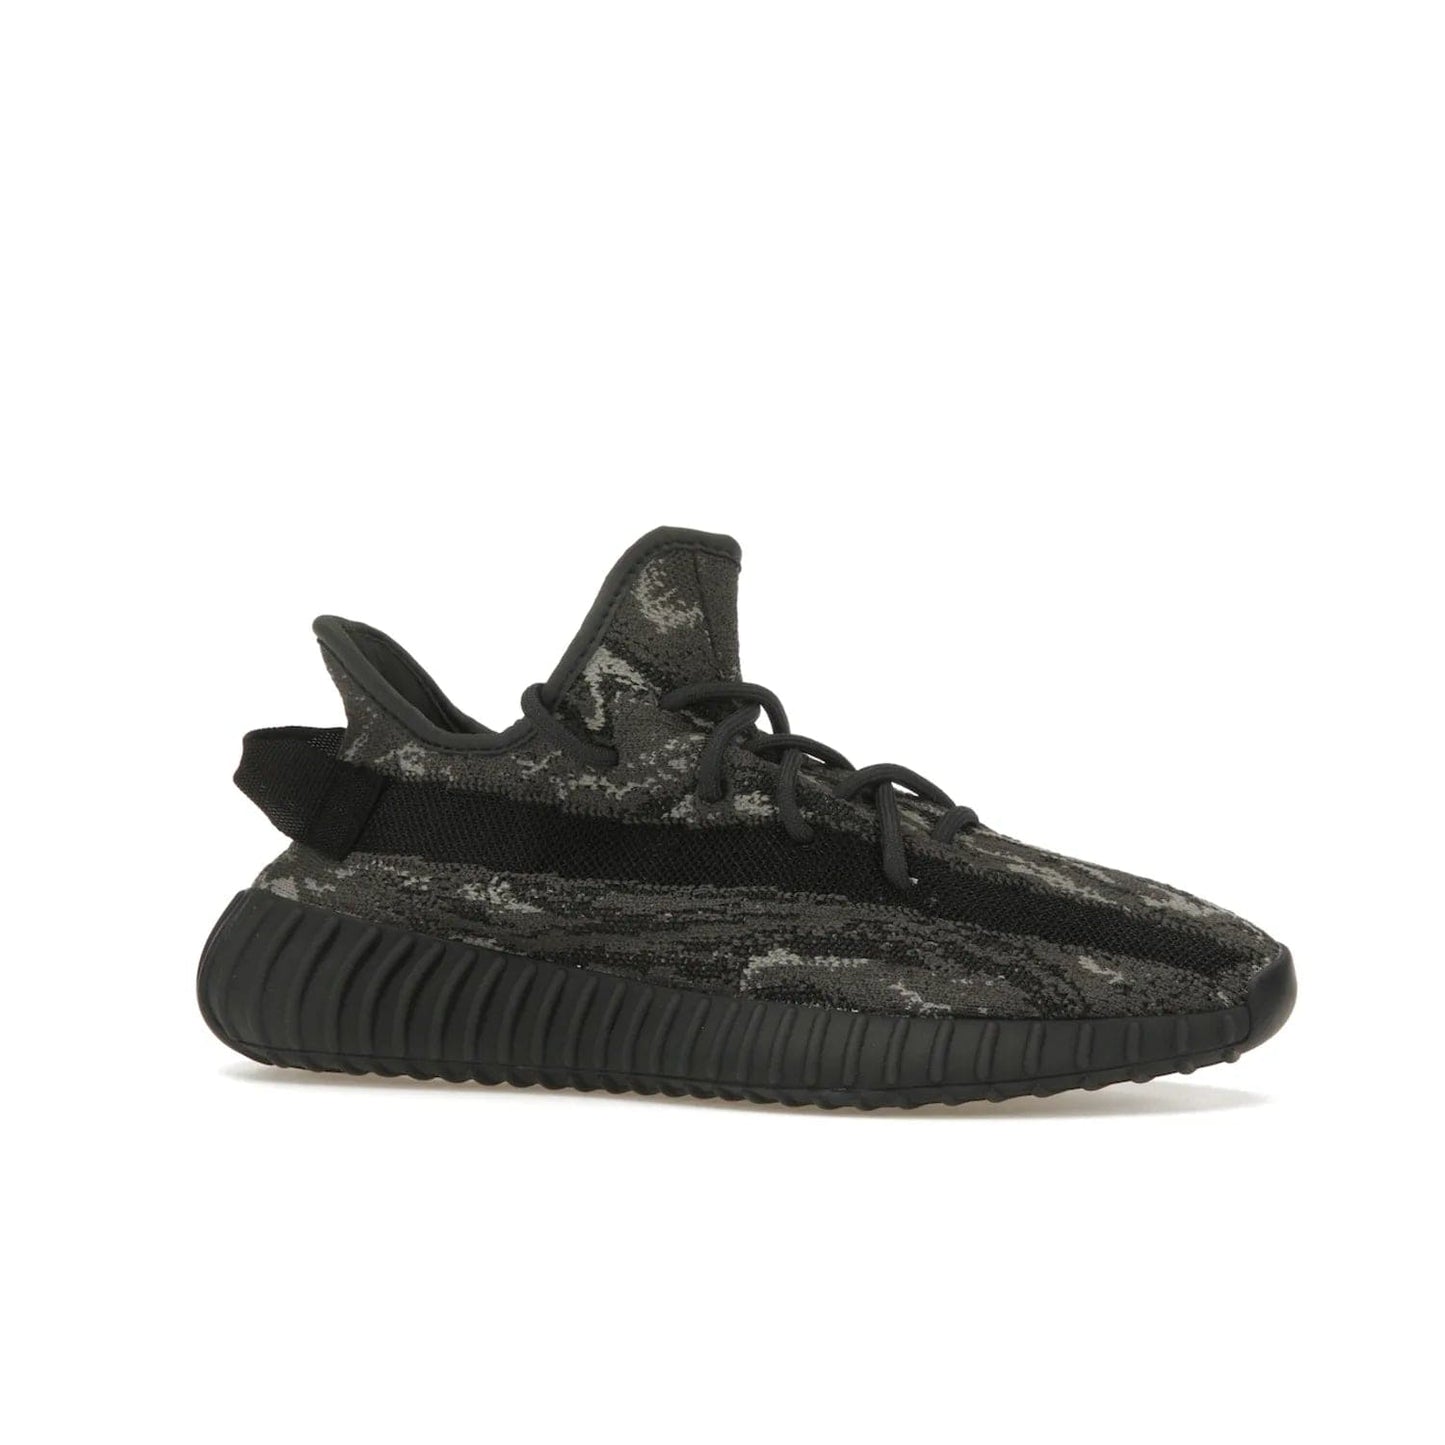 adidas Yeezy Boost 350 V2 MX Dark Salt - Image 3 - Only at www.BallersClubKickz.com - ##
The adidas Yeezy Boost 350 V2 MX Dark Salt offers a contemporary look with a signature combination of grey and black hues. Cushioned Boost midsole and side stripe allow for all day wear. Get the perfect fashion-forward addition with this sleek sneaker for $230.